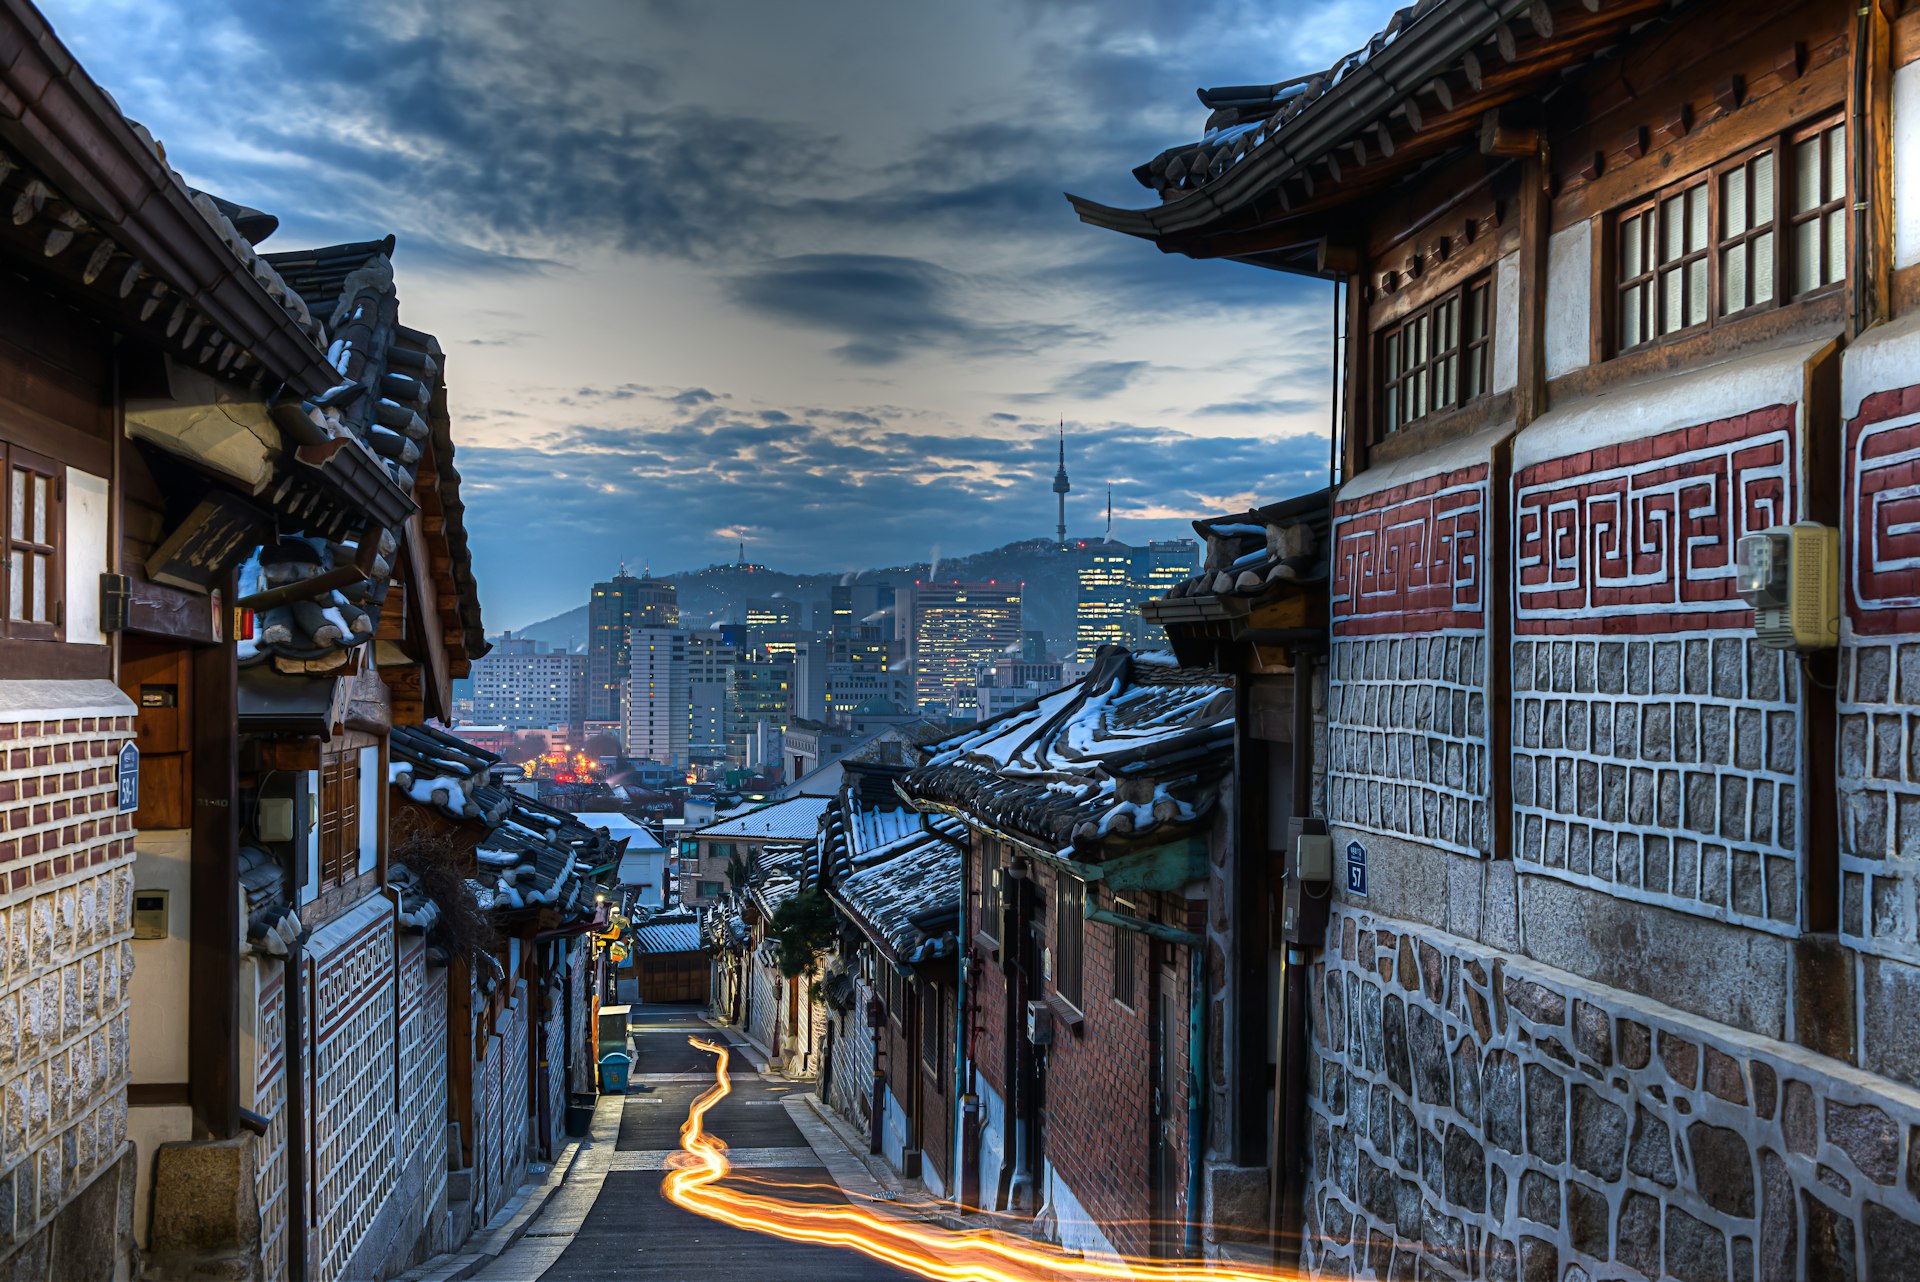 Buildings in the traditional style pictured in narrow street at dawn in Bukchon Hanok Village, Seoul